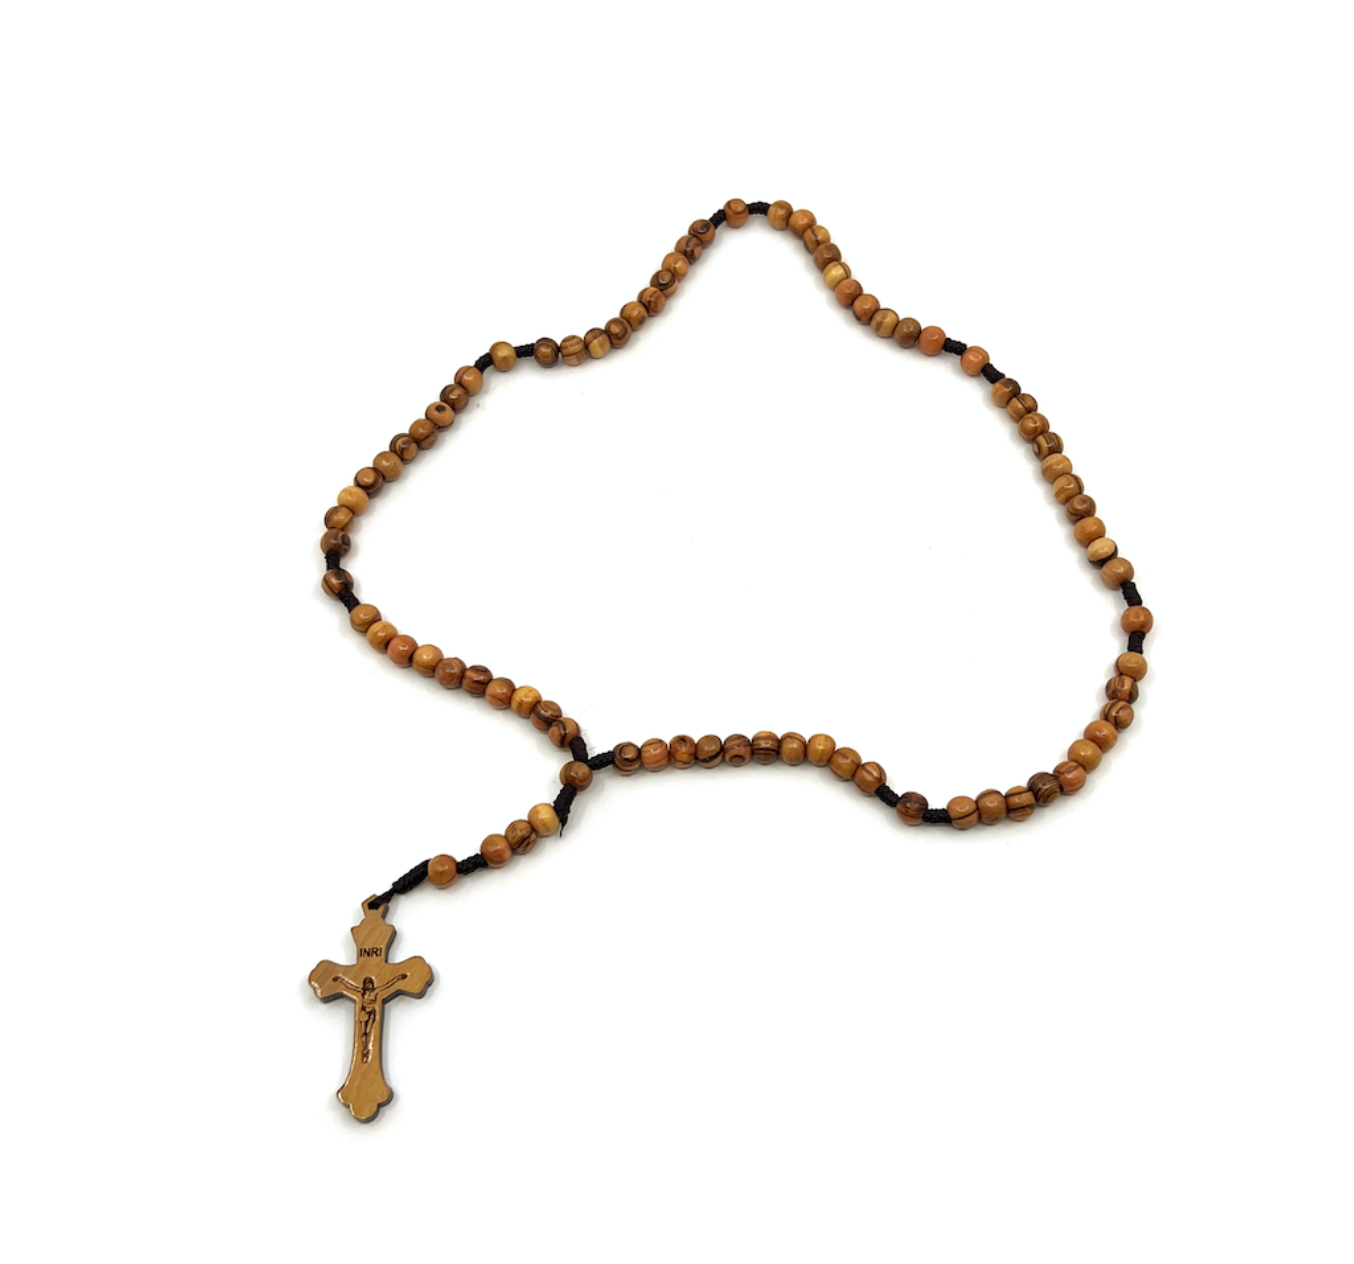 Seven Decade Rosary olive Wood Beads Handmade in Jerusalem 